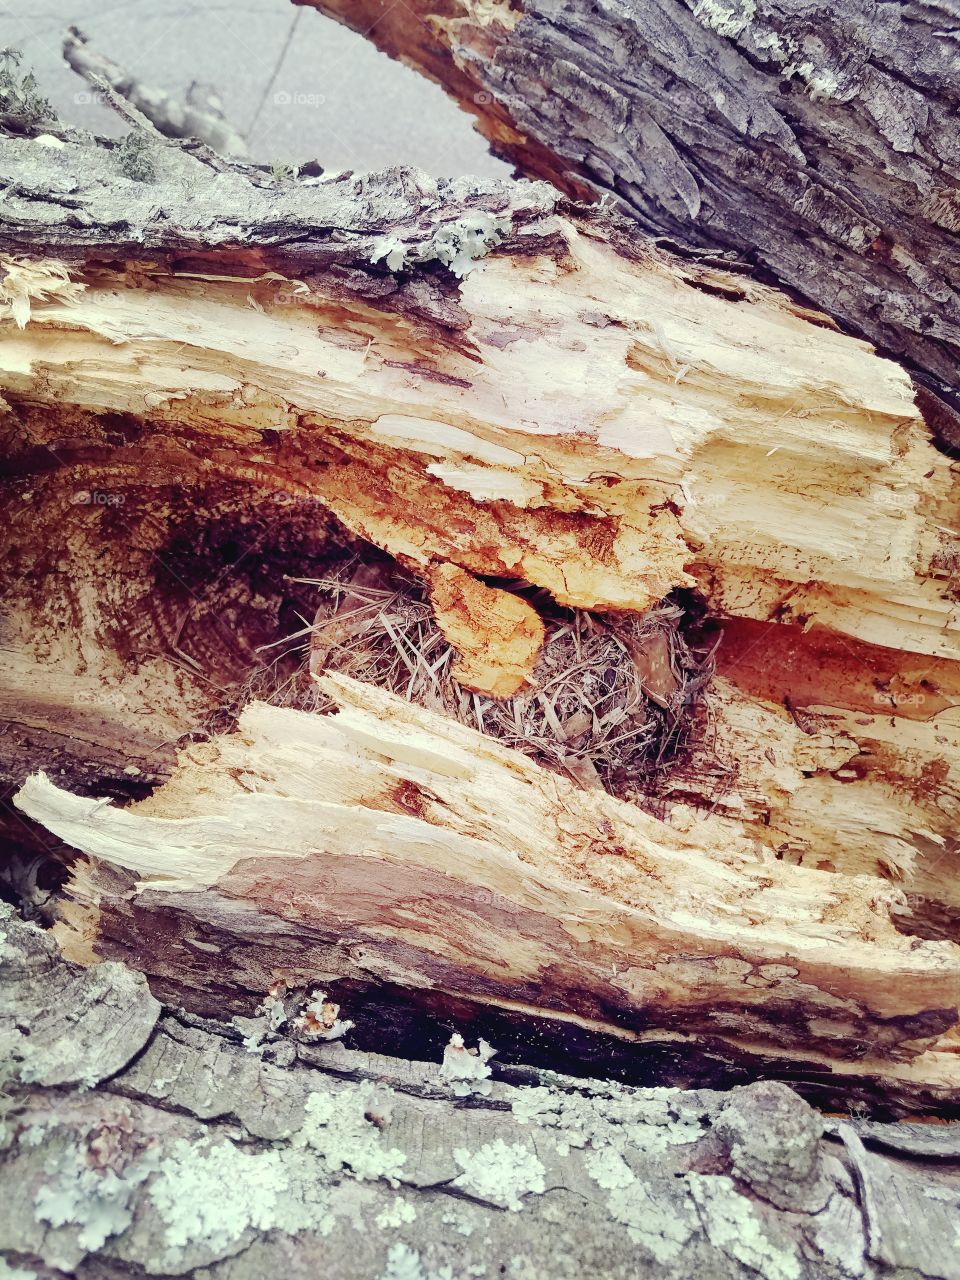 when nature falls
old tree falls during storm to reveal a hidden birds nest within